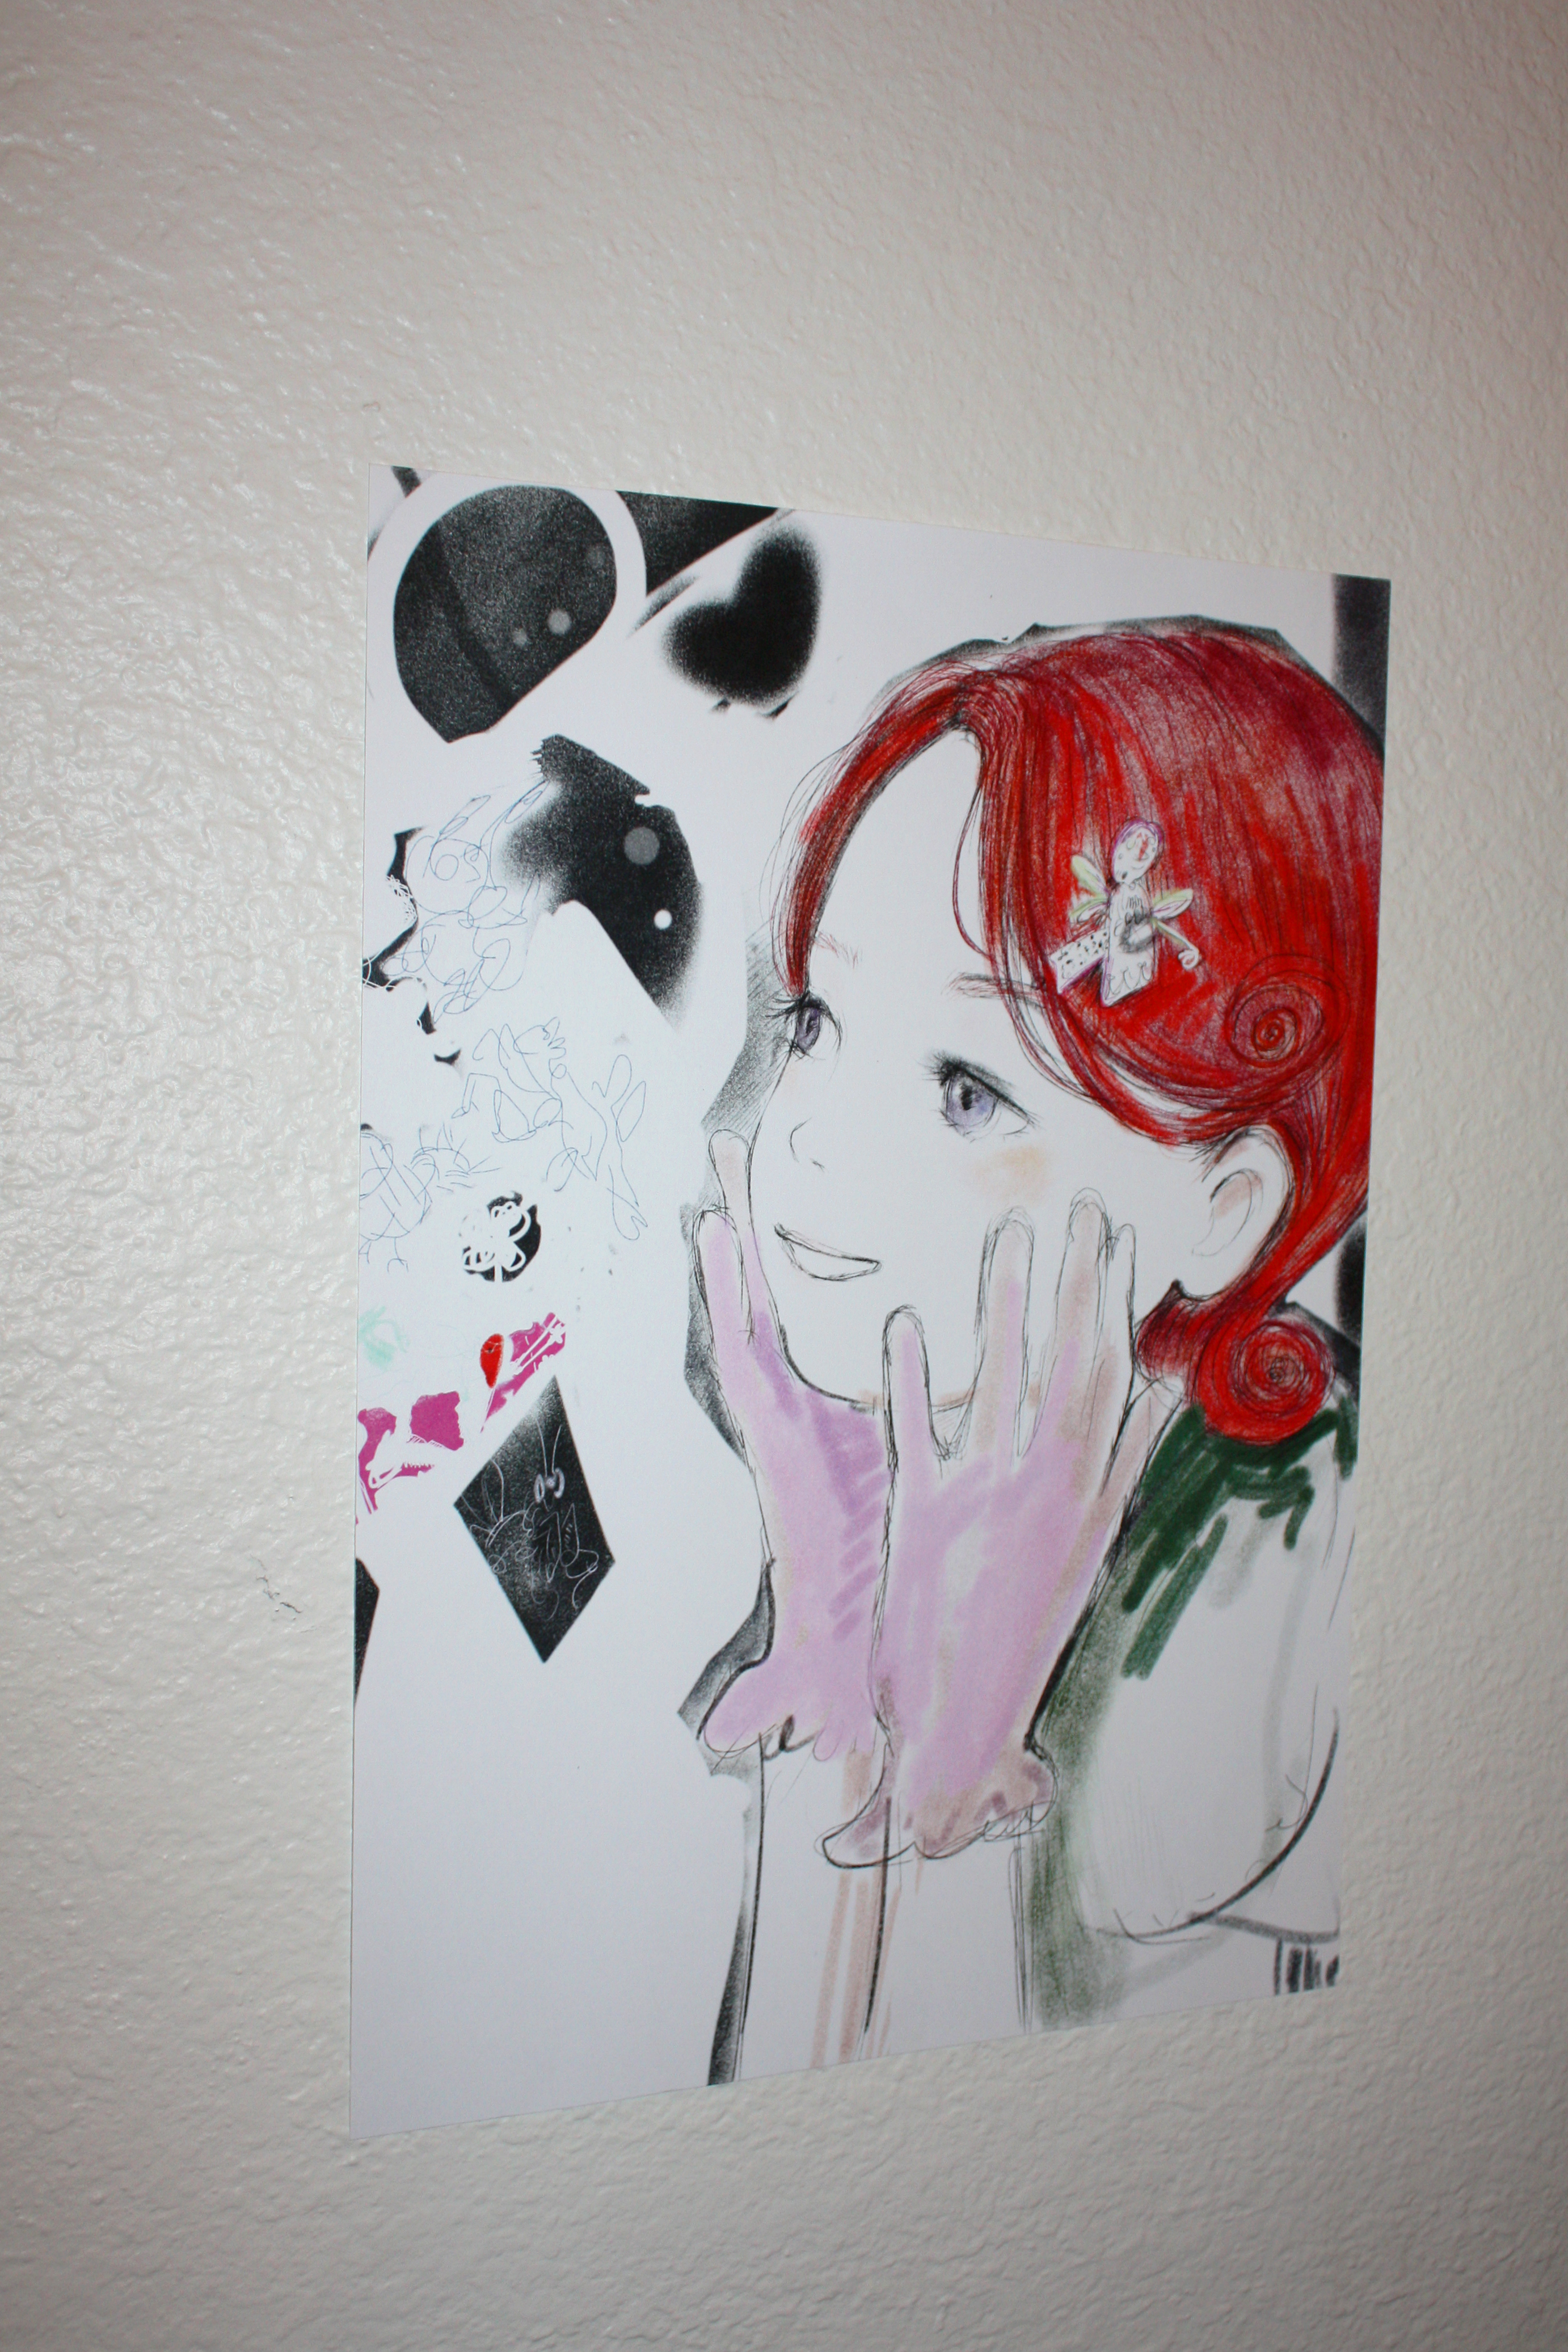 Detail of an anime girl with red hair hung on a white wall